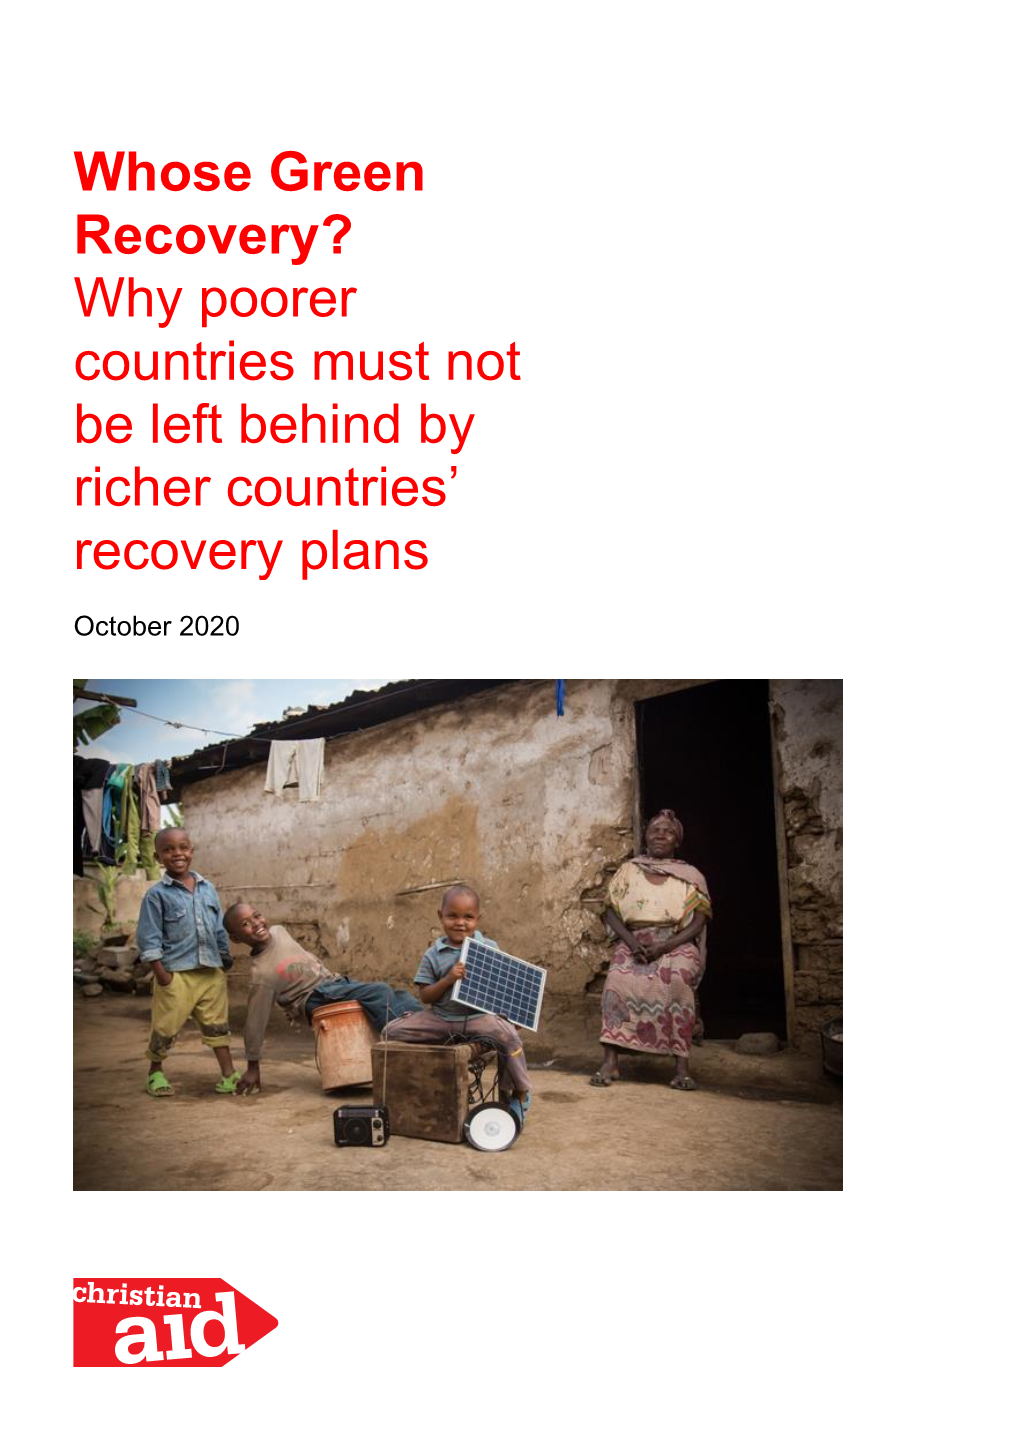 Whose Green Recovery?: Why Poorer Countries Must Not Be Left Behind by Richer Countries’ Recovery Plans